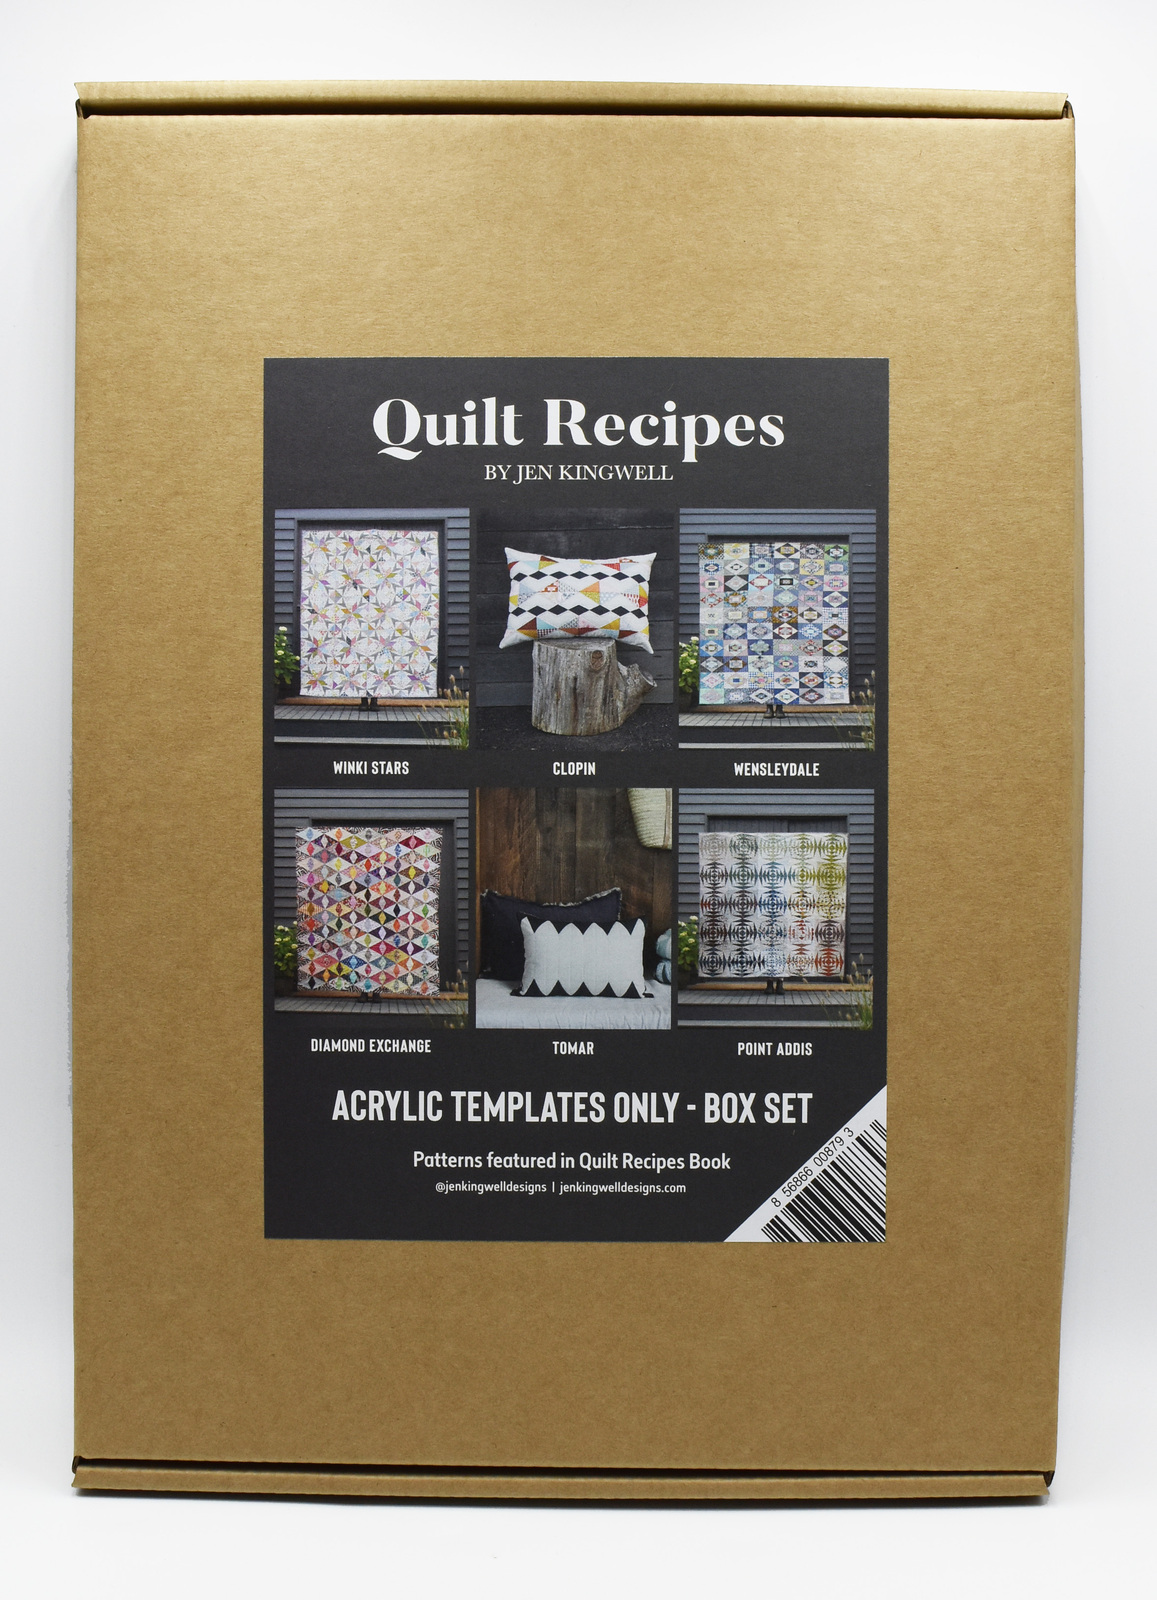 Quilt Recipes by Jen Kingwell 